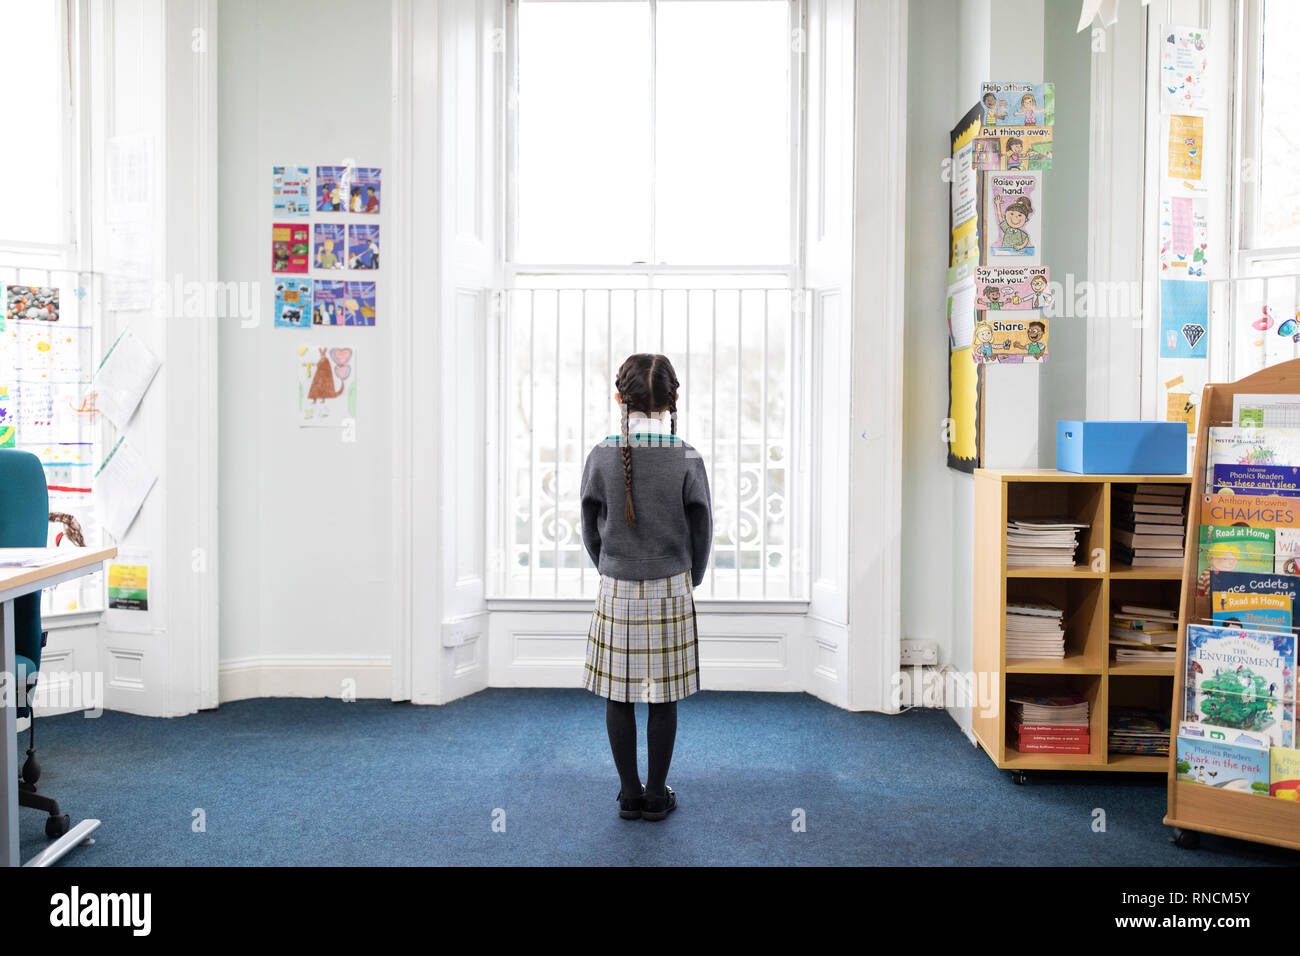 Primary school aged girl standing alone in front of classroom window Stock Photo